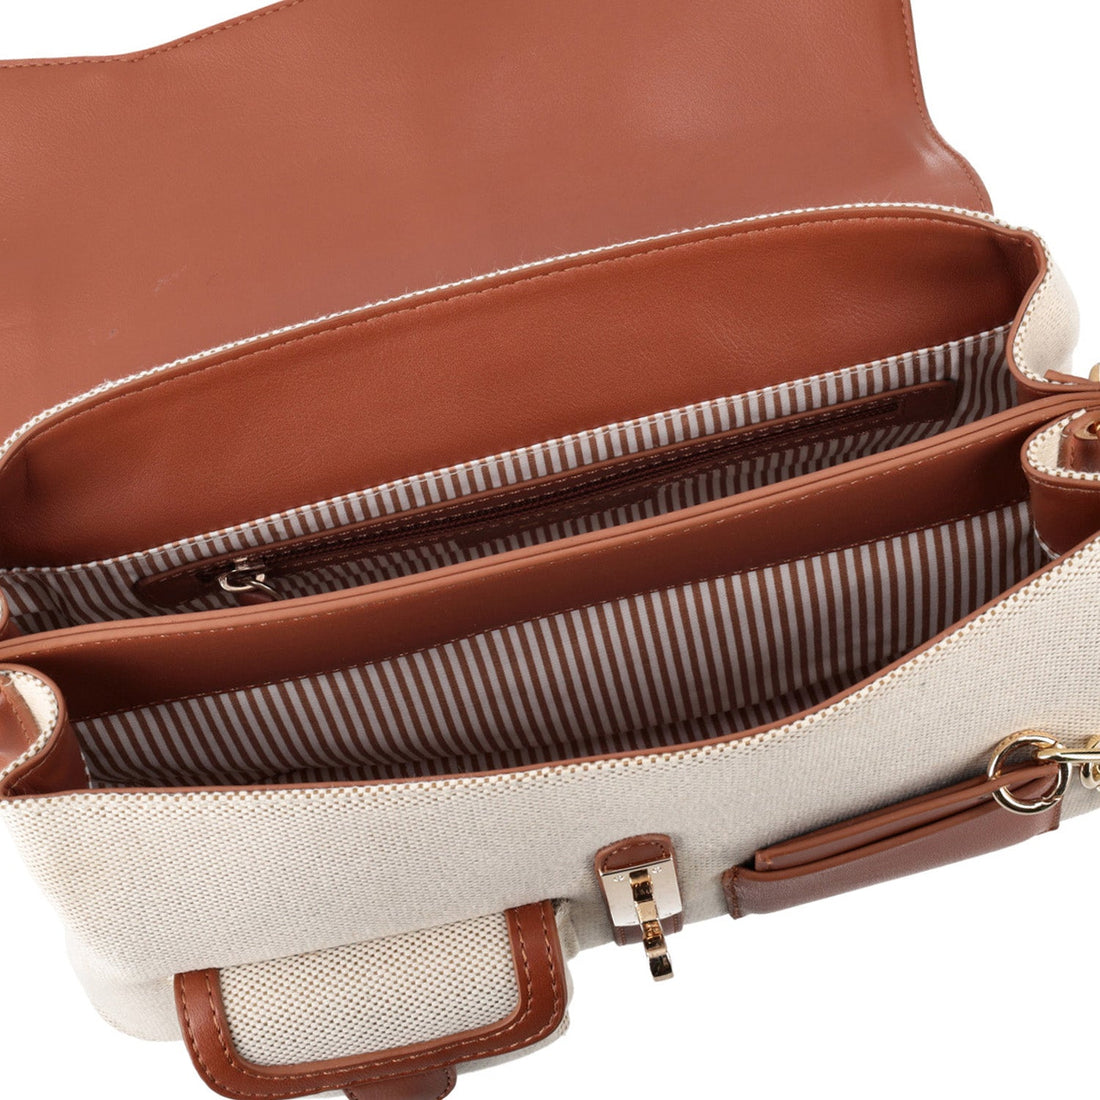 TAN FIORDALISO SHOULDER BAG WITH FLAP